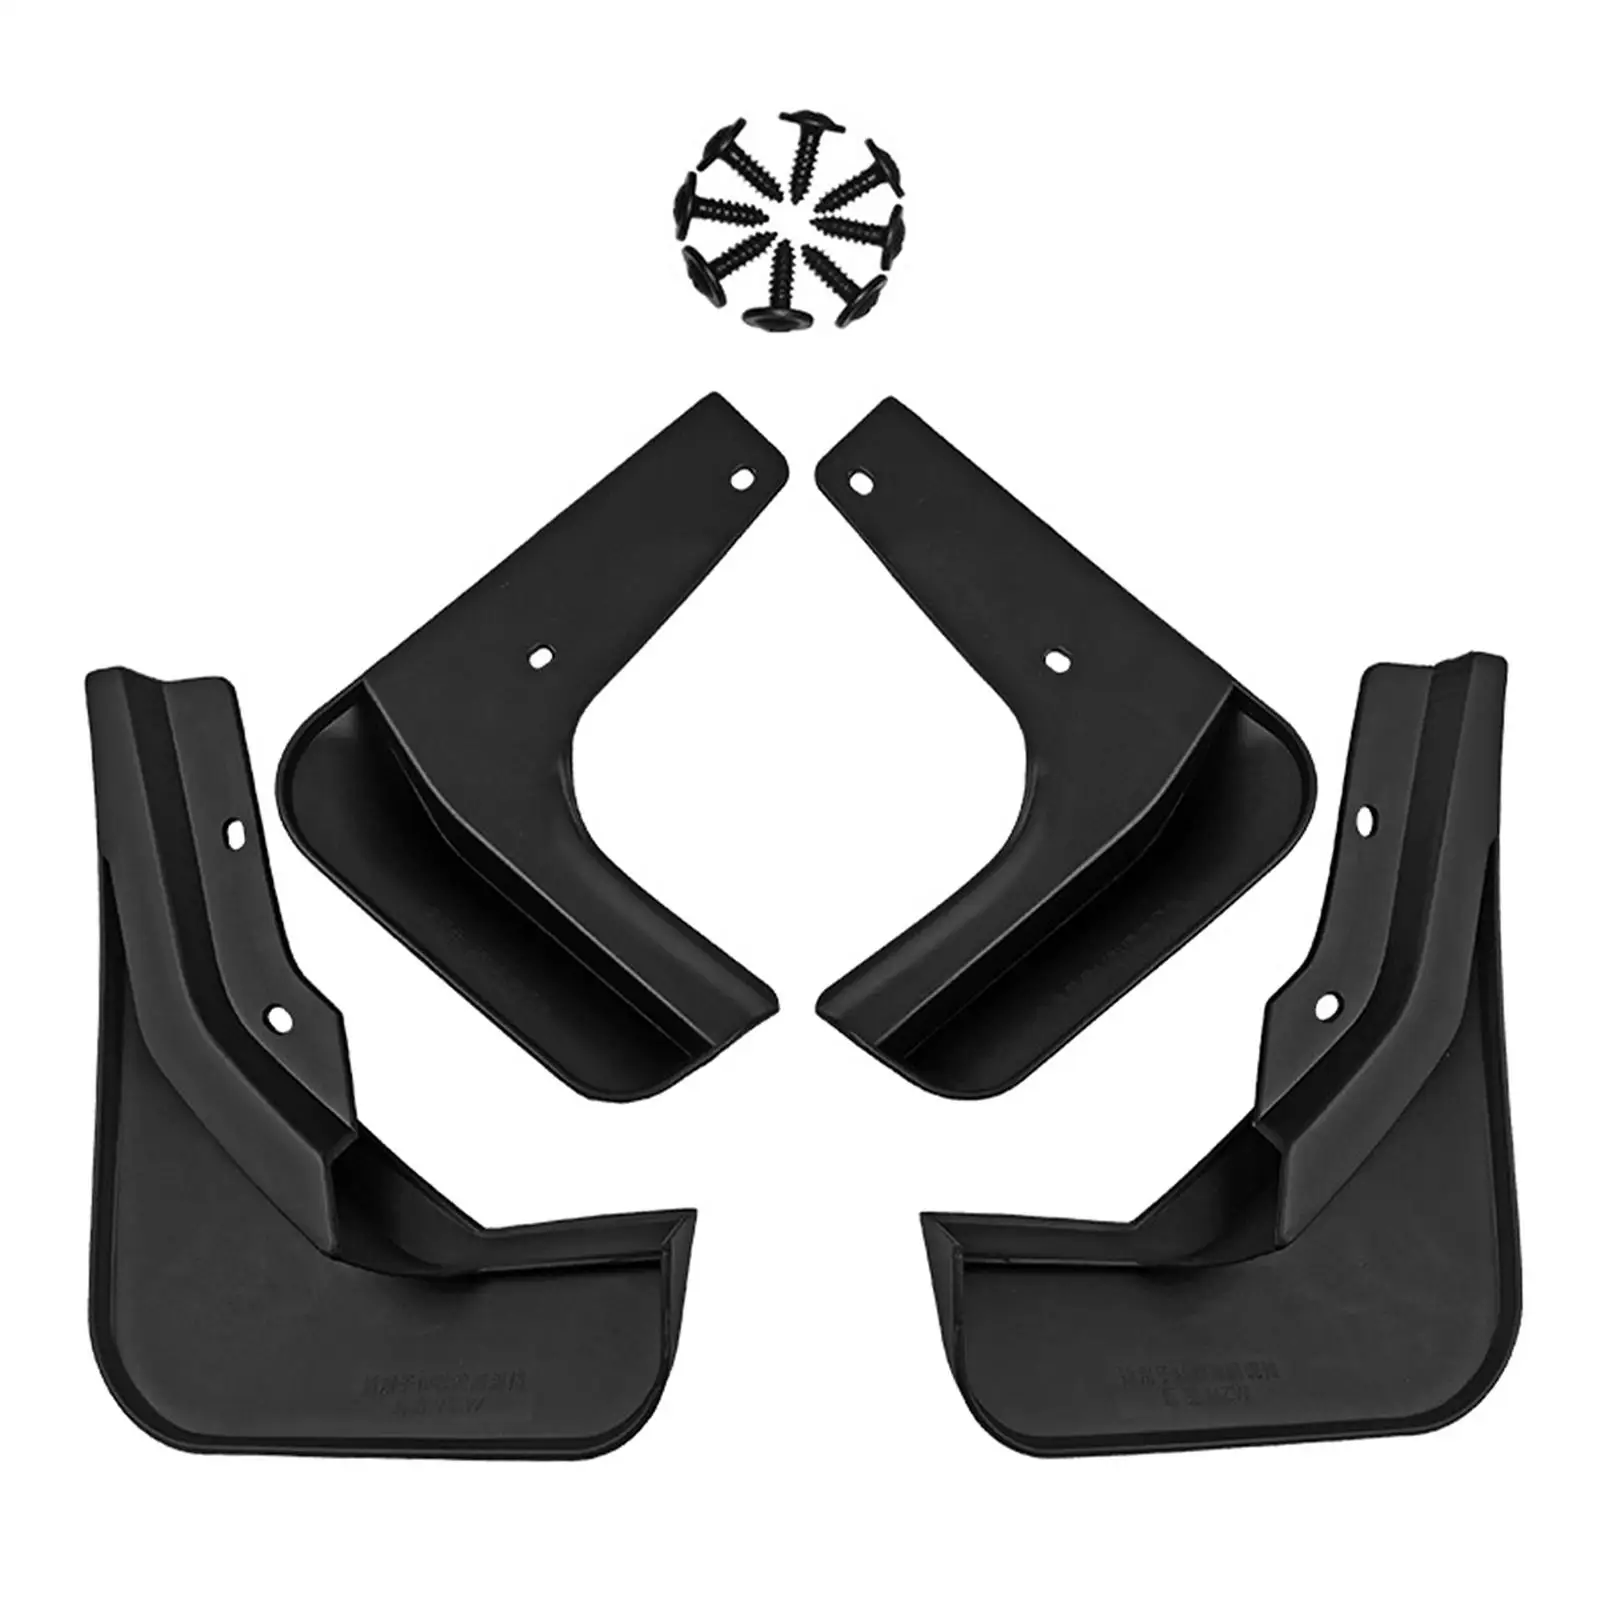 4x Mud Flaps Splash Guards Front and Rear Side Mudguard Fender for Volkswagen Jetta Sagitar High Reliability Repair Part